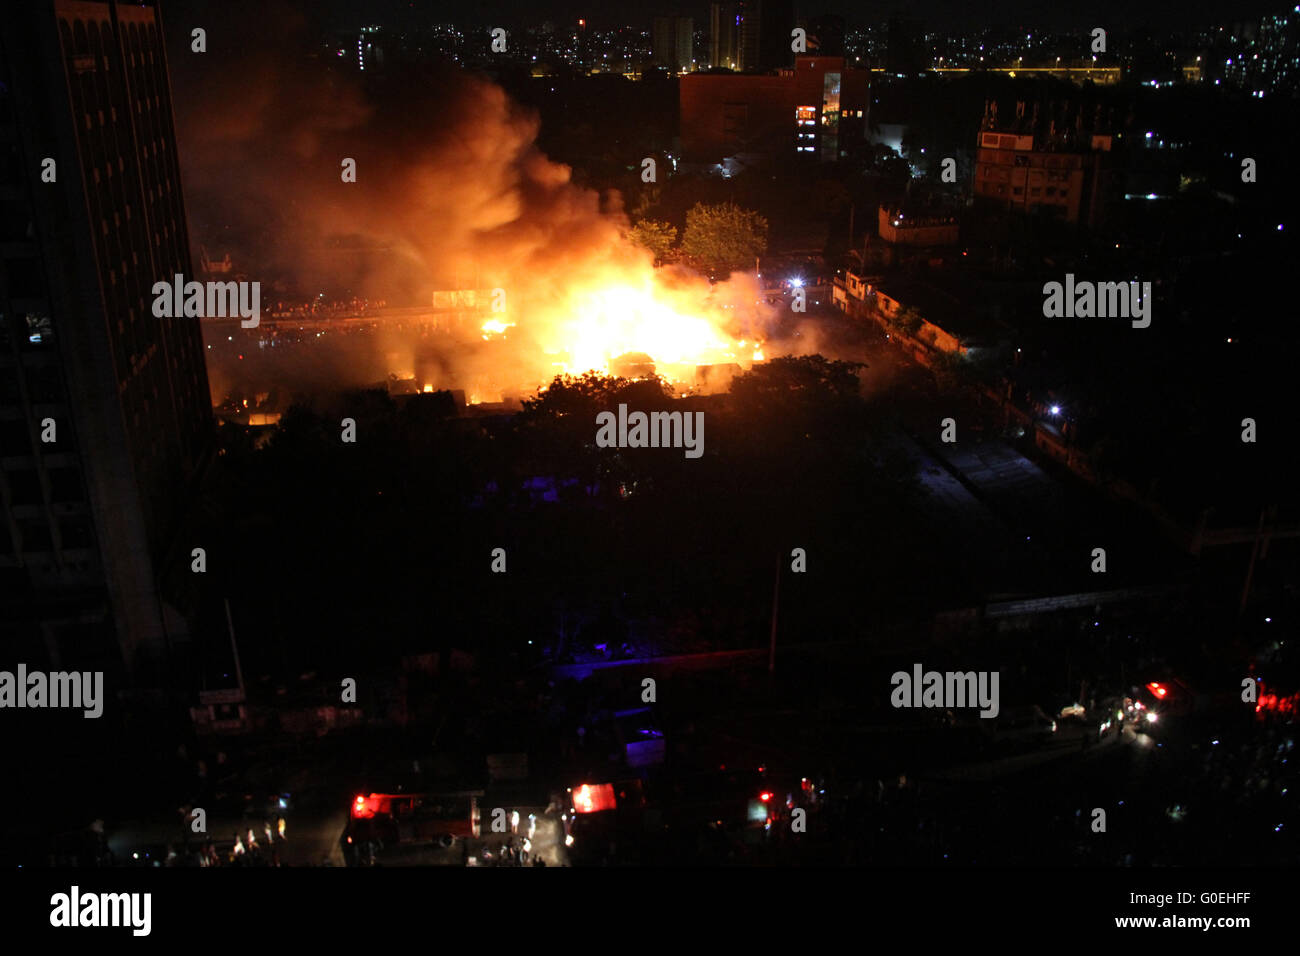 Dhaka, Bangladesh. 1st May, 2016. Fire has broken out at the largest kitchen Market at Karwan Bazar in Dhaka, Bangladesh on 1st May, 2016. Fire Service control room officials said, 22 units of fire fighting teams to bring the flames under control. There are about 200 shops in the area - where groceries and other kitchen goods are regularly distributed throughout Dhaka city after coming in from different parts of the country. Credit:  Rehman Asad/Alamy Live News Stock Photo